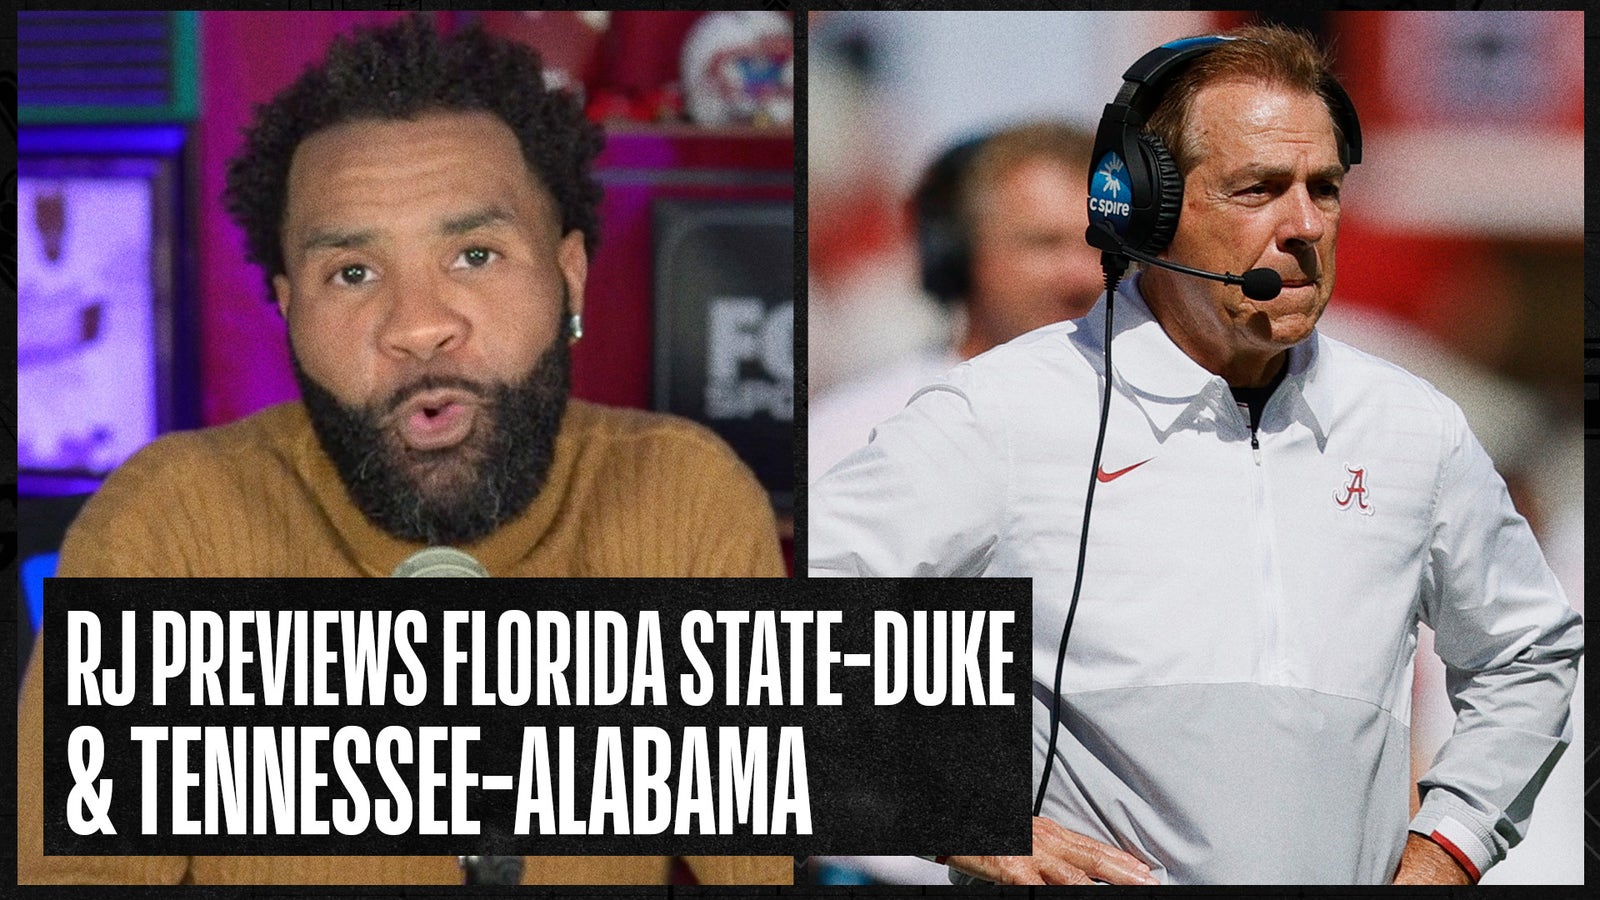 Tennessee-Alabama & Florida State-Duke preview: Who will seize control in their conference? 